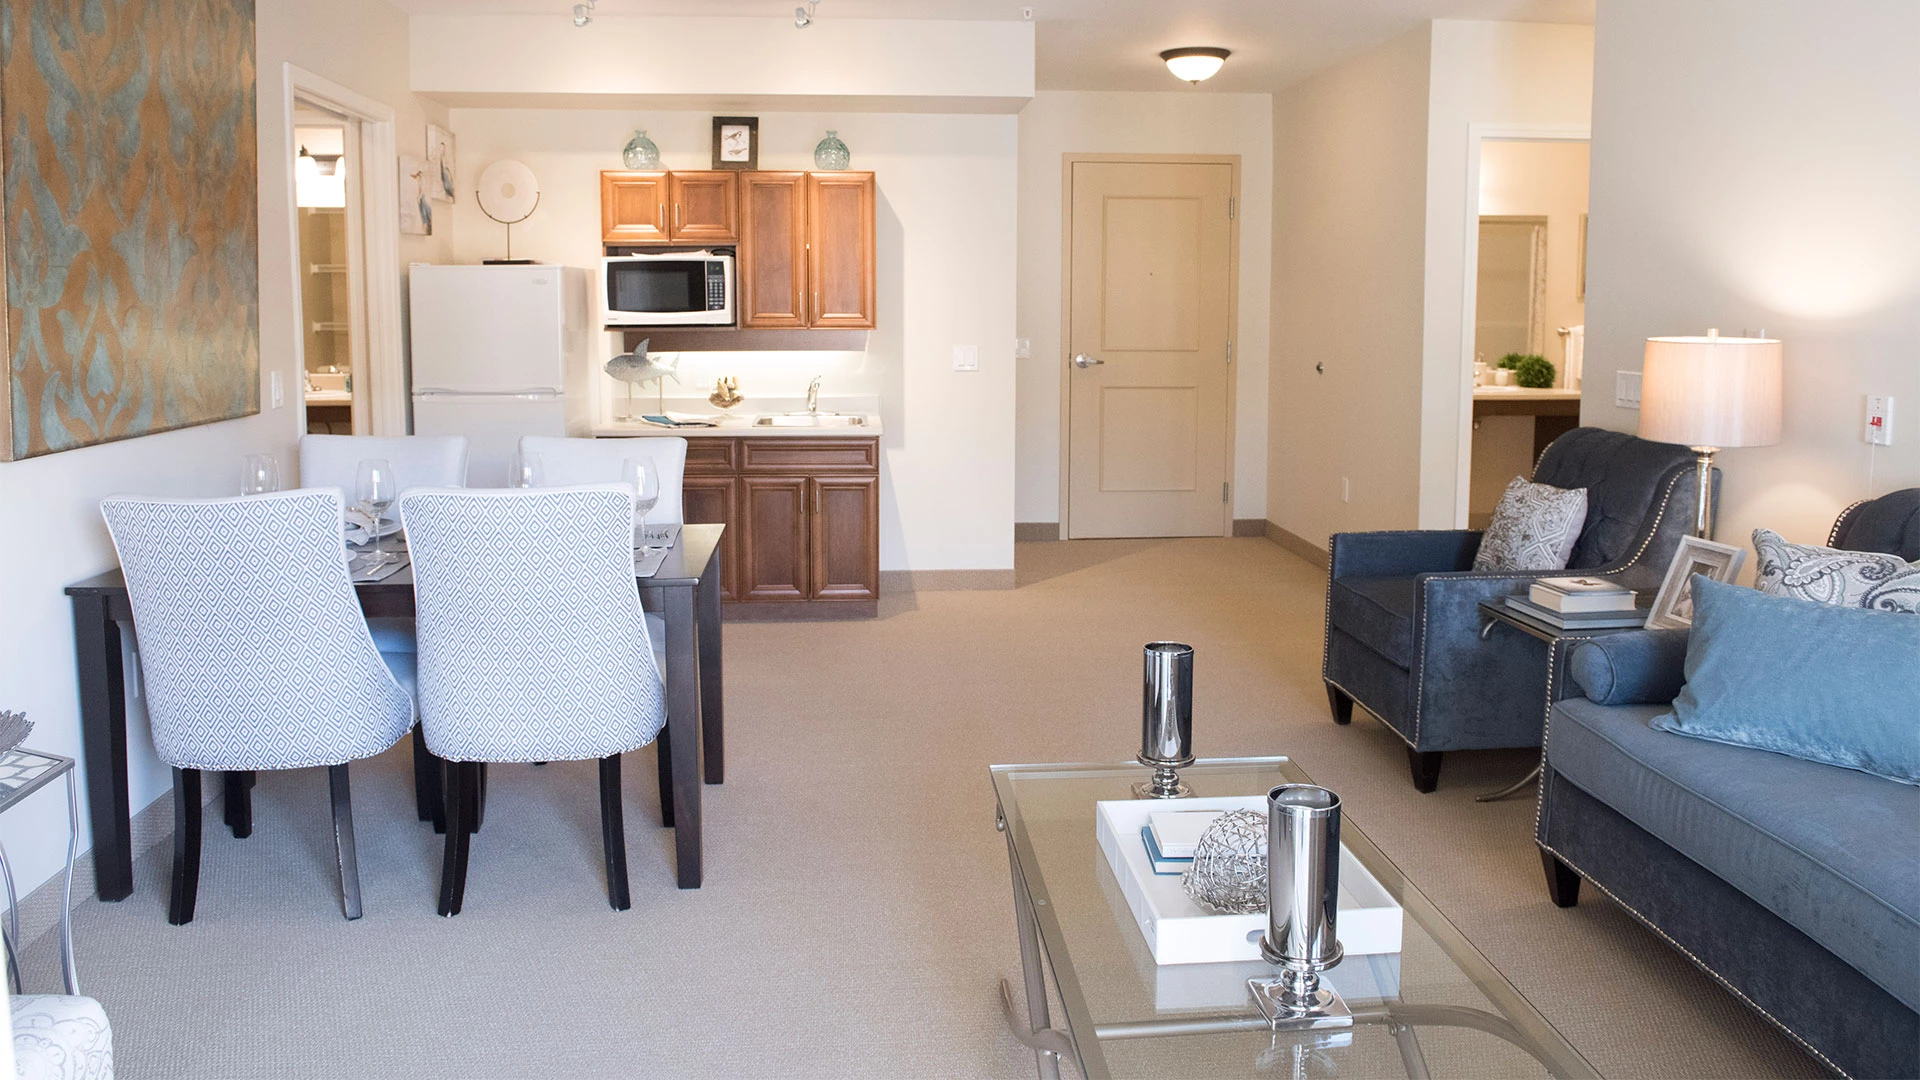 A view of the kitchenette and living room in a Sage Hill senior apartments